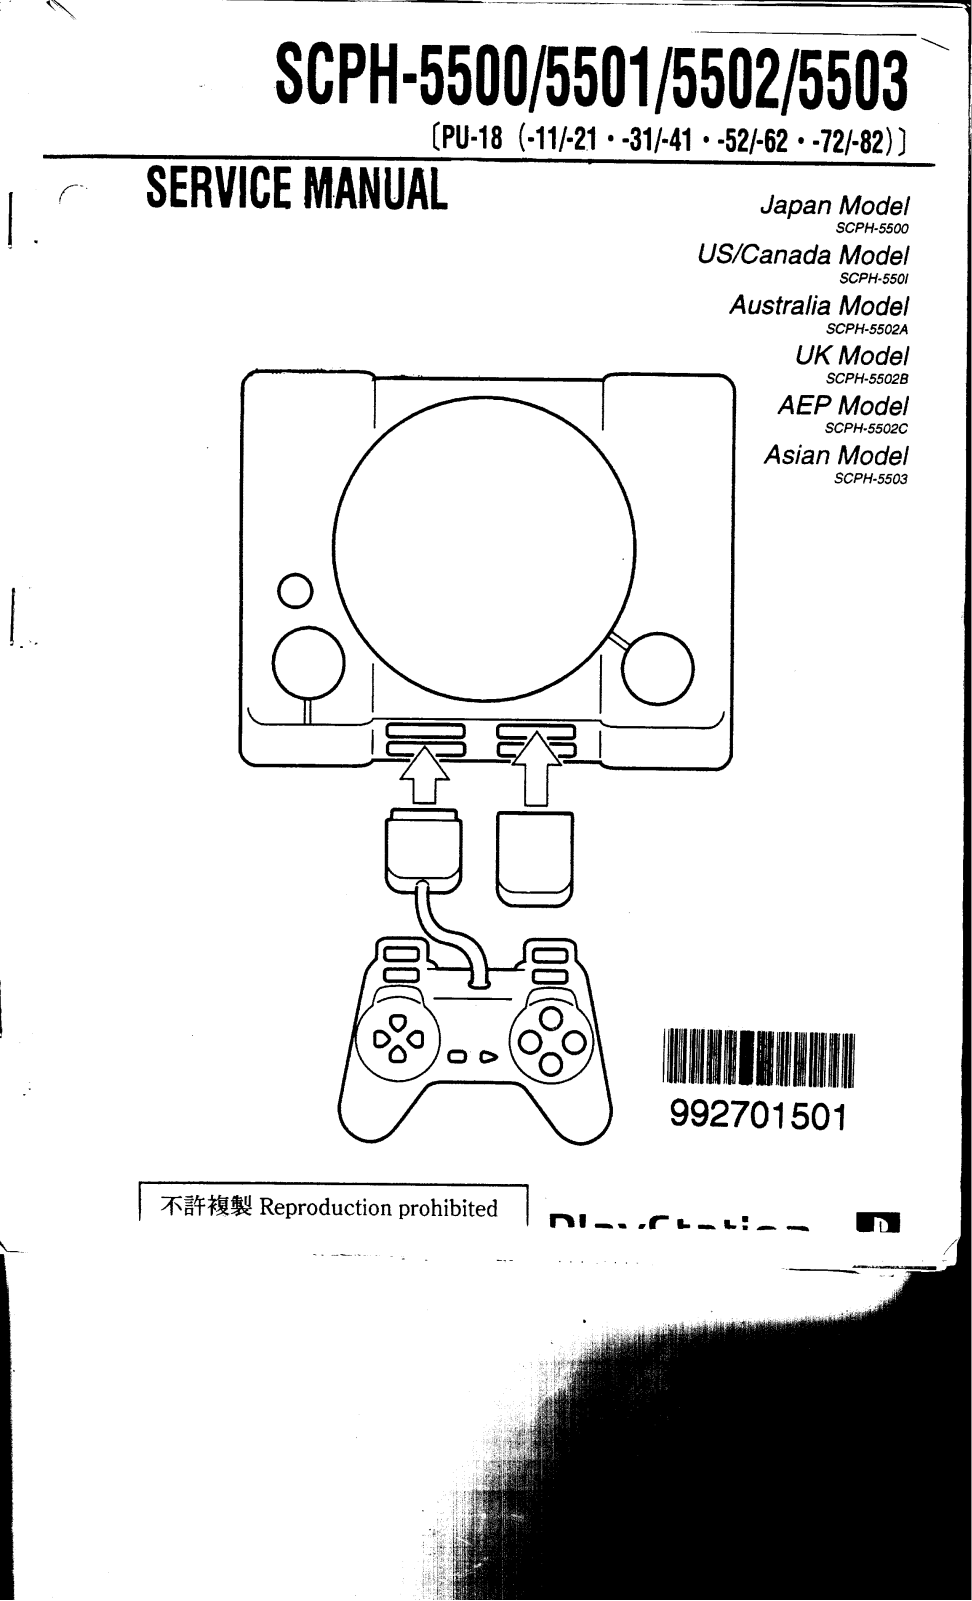 PlayStation SCPH-5500, SCPH-5501, SCPH-5502, SCPH-5503 Service Manual